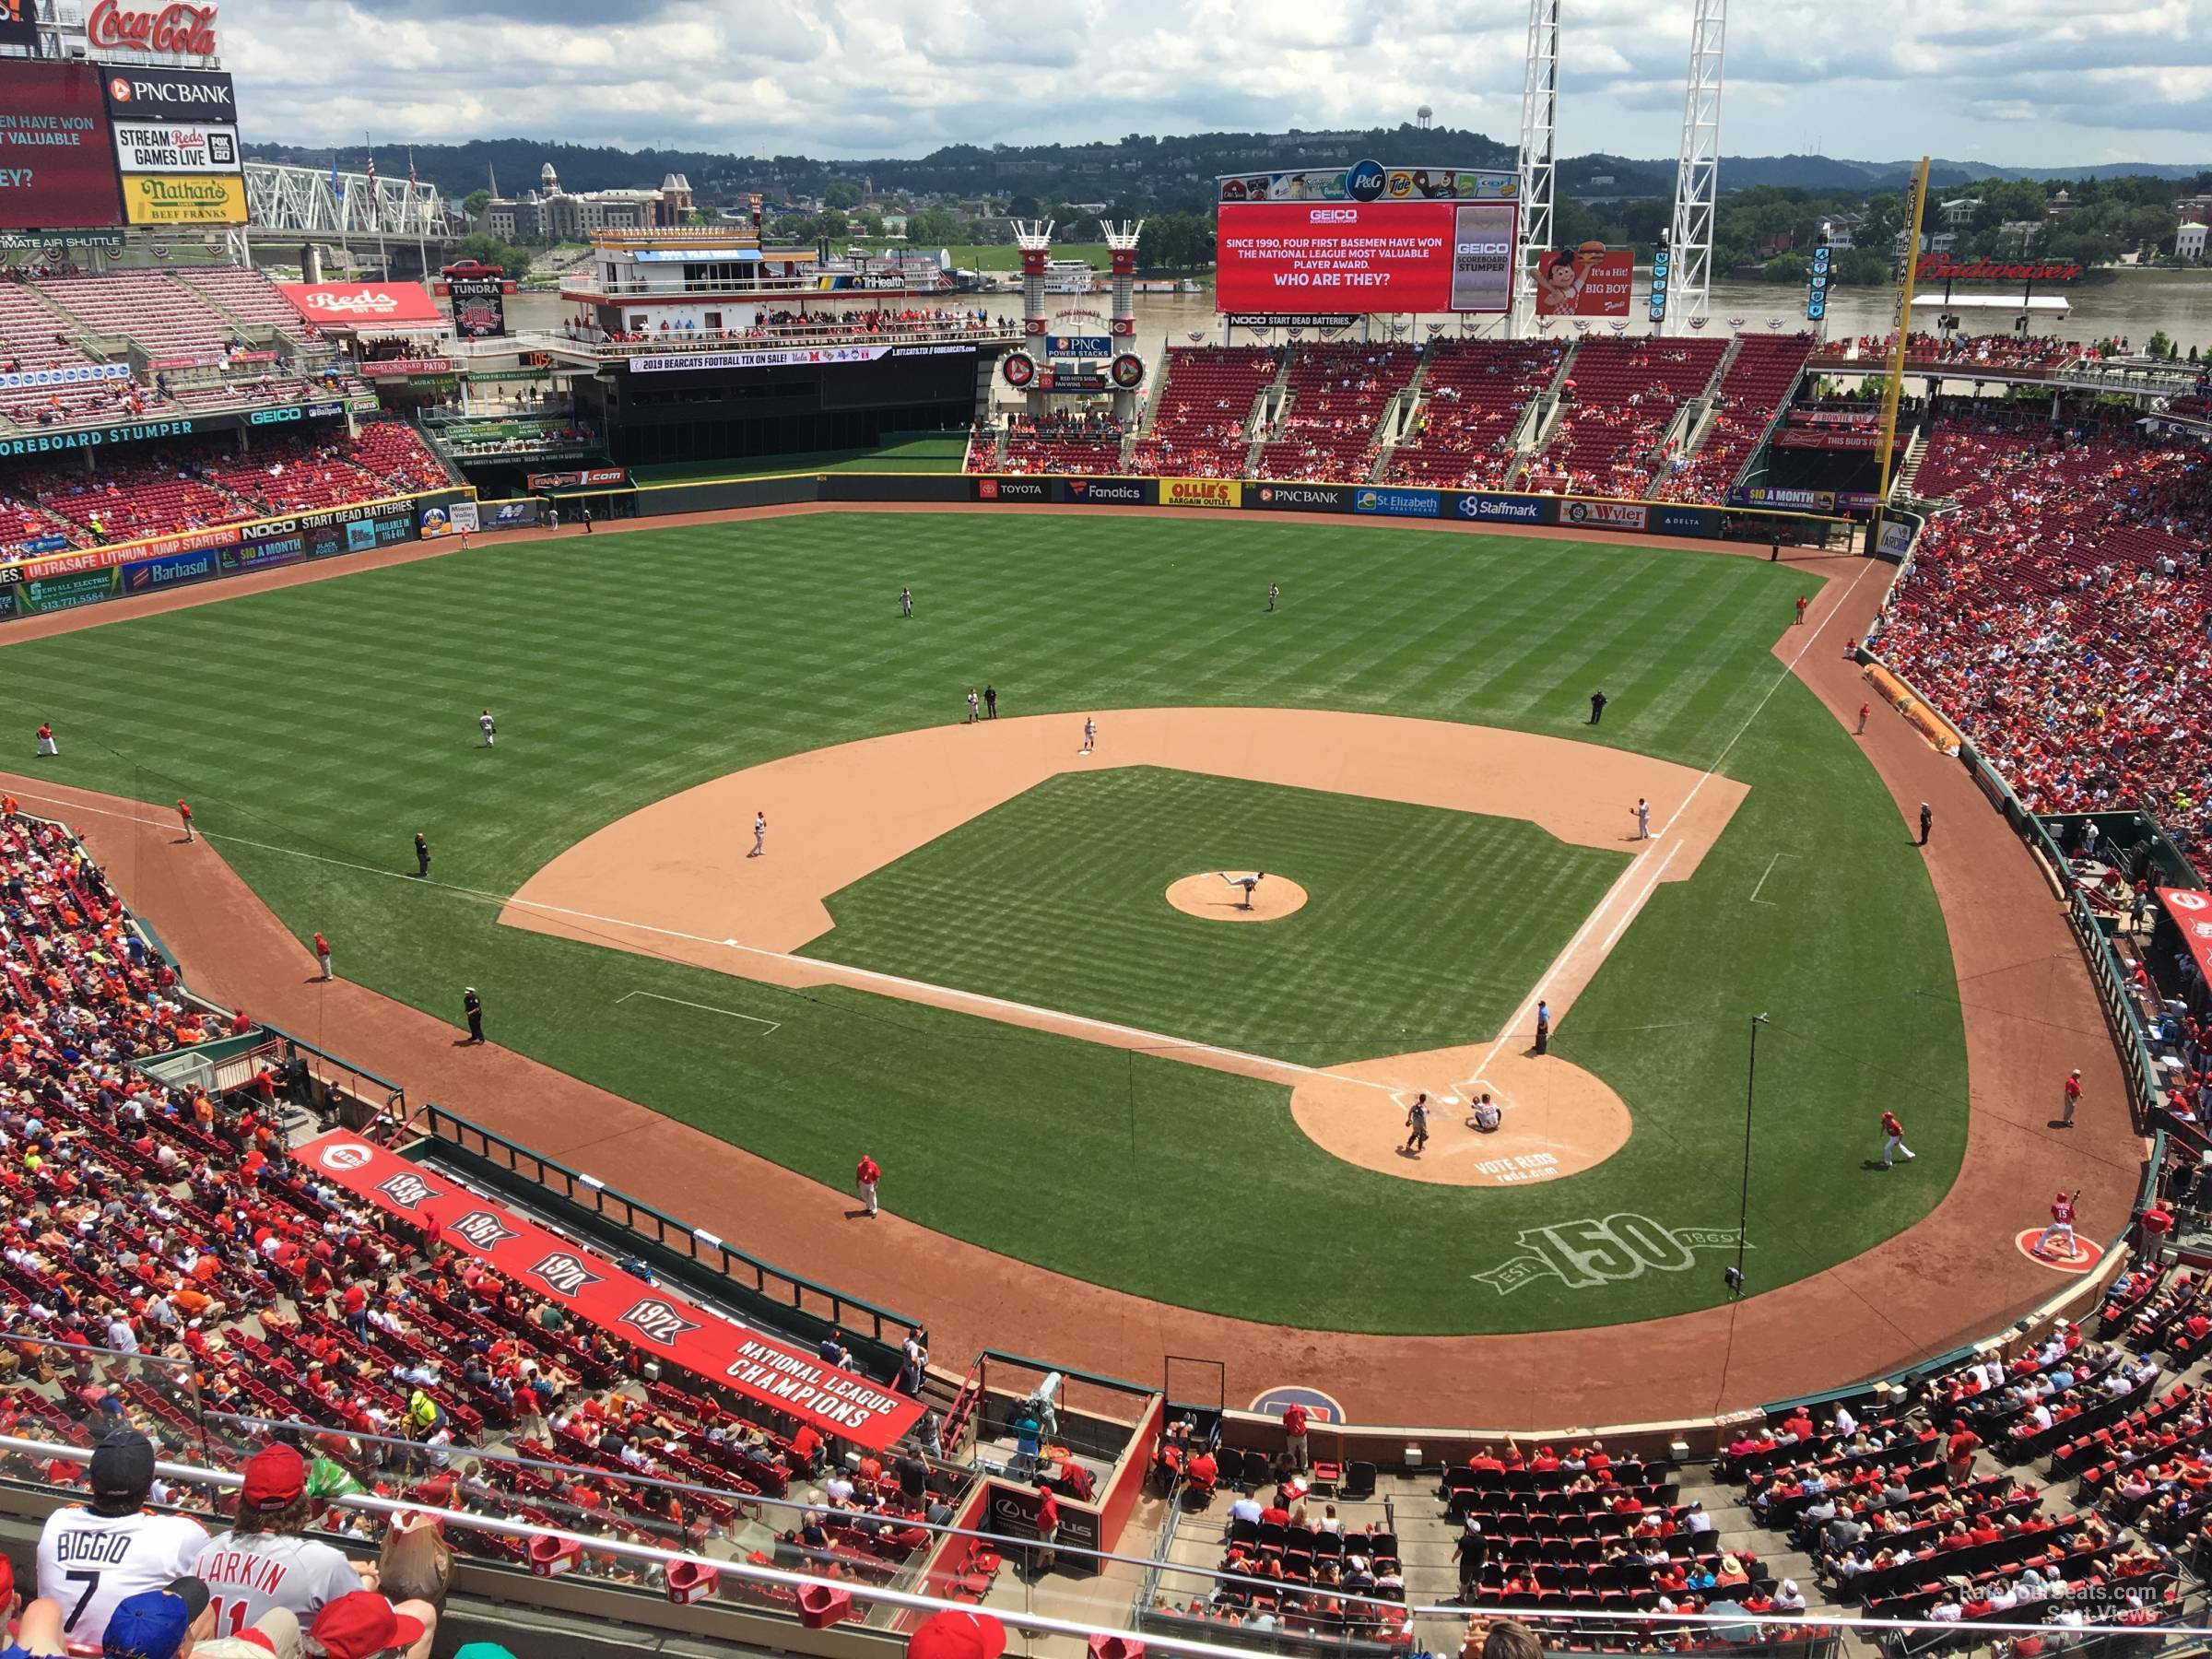 Section 523 at Great American Ball Park 